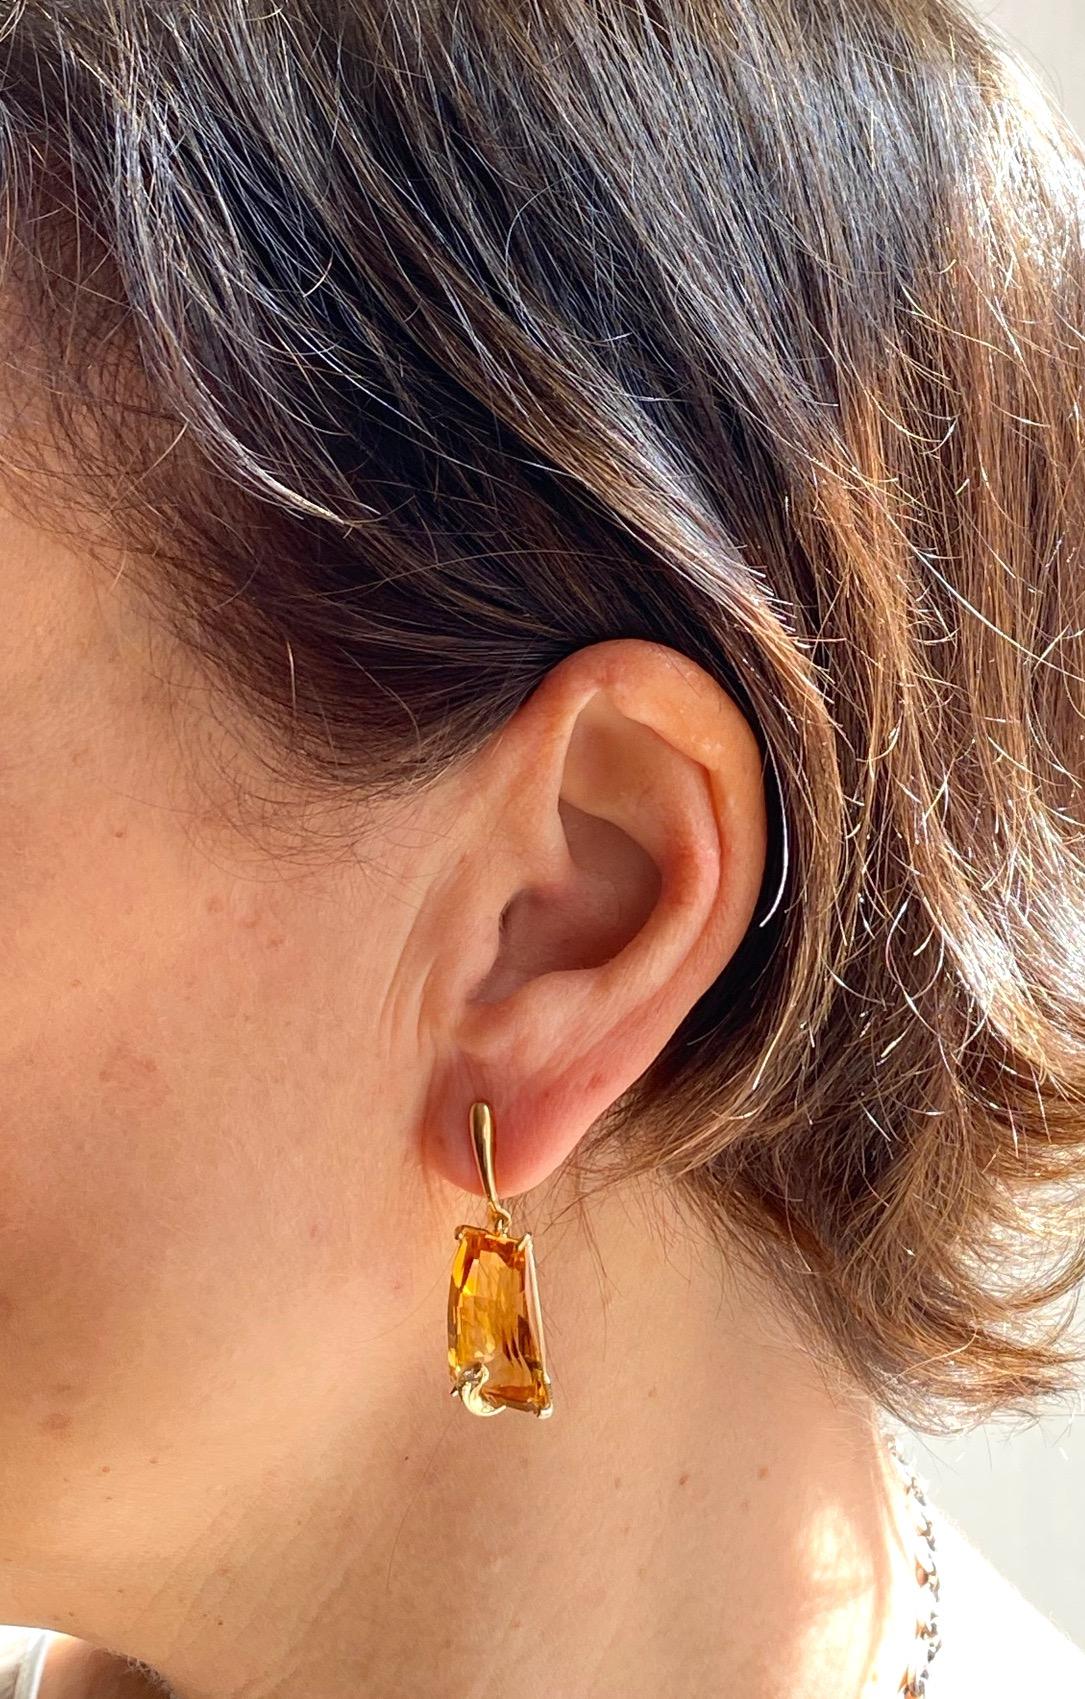 Rossella Ugolini Design Collection this original pair of dangle earrings is handcrafted in 18 karats yellow gold and enriched with two different cut Citrine and 0.04 karats Brown Diamonds brilliant cut. 
The citrine stones have been hand cutted